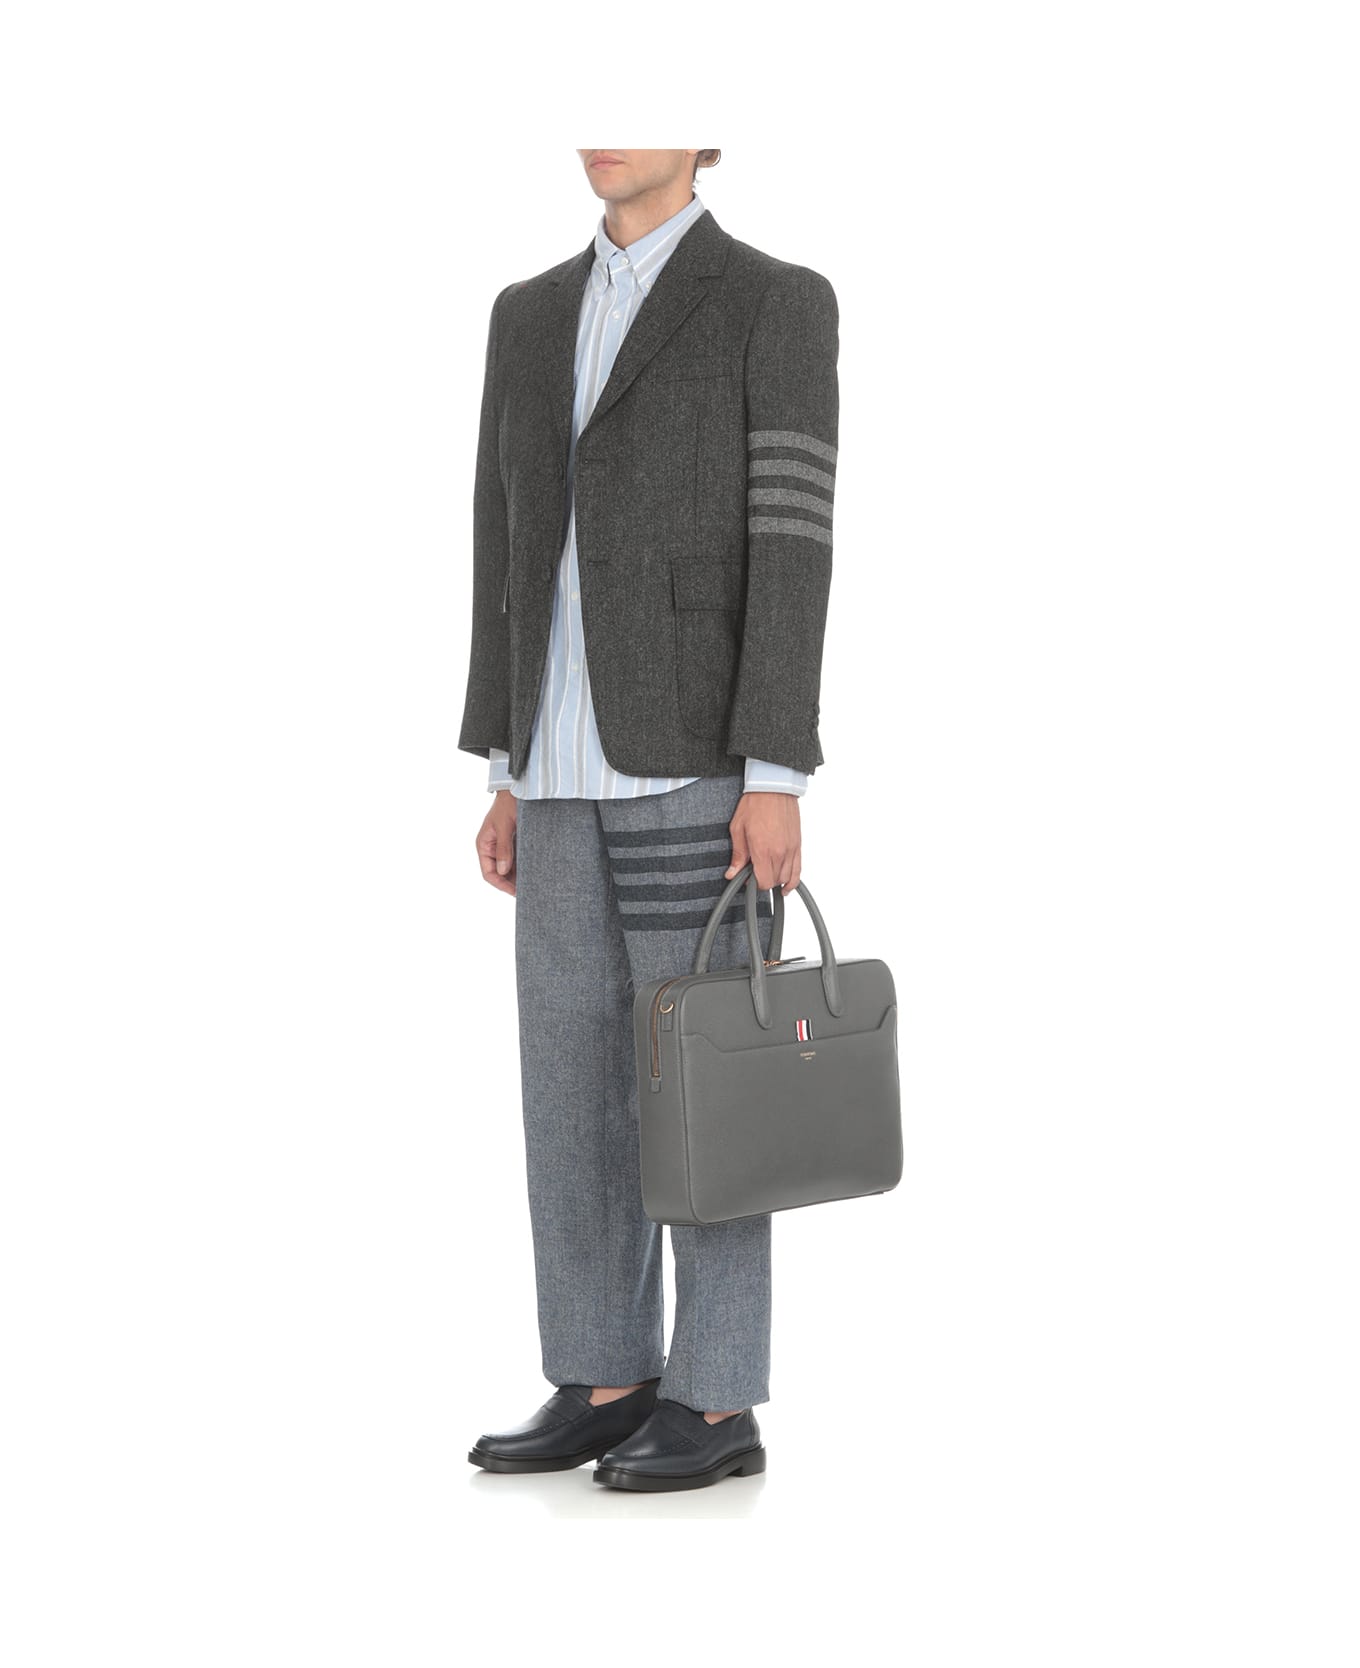 Thom Browne Unstructured Straight Fit Formal Jacket - Grey ブレザー